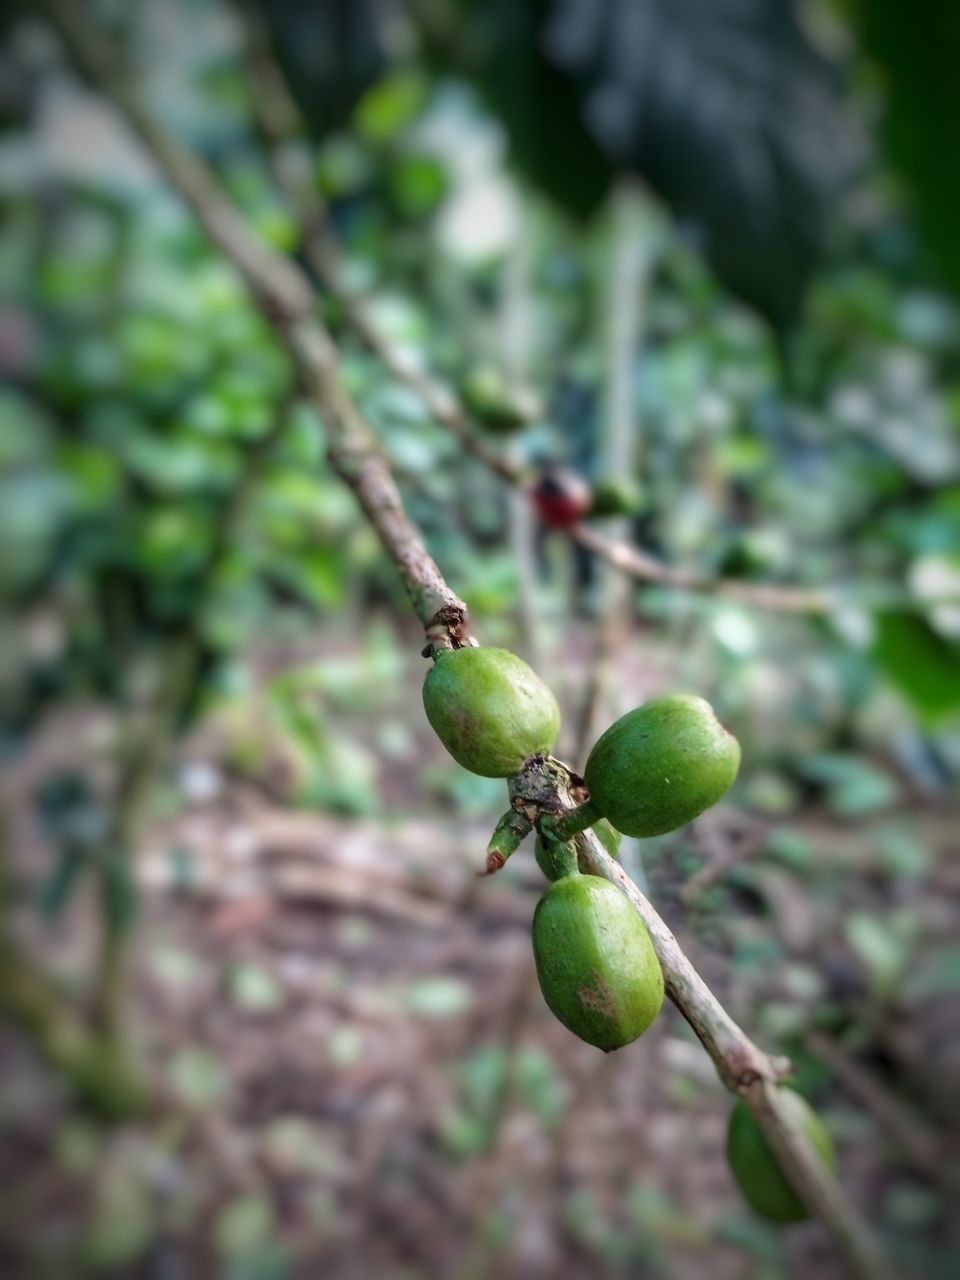 fruit, food, food and drink, healthy eating, plant, tree, green, growth, branch, freshness, focus on foreground, nature, no people, agriculture, leaf, produce, close-up, flower, wellbeing, plant part, day, outdoors, unripe, olive, beauty in nature, fruit tree, ripe, selective focus, land, twig, olive tree